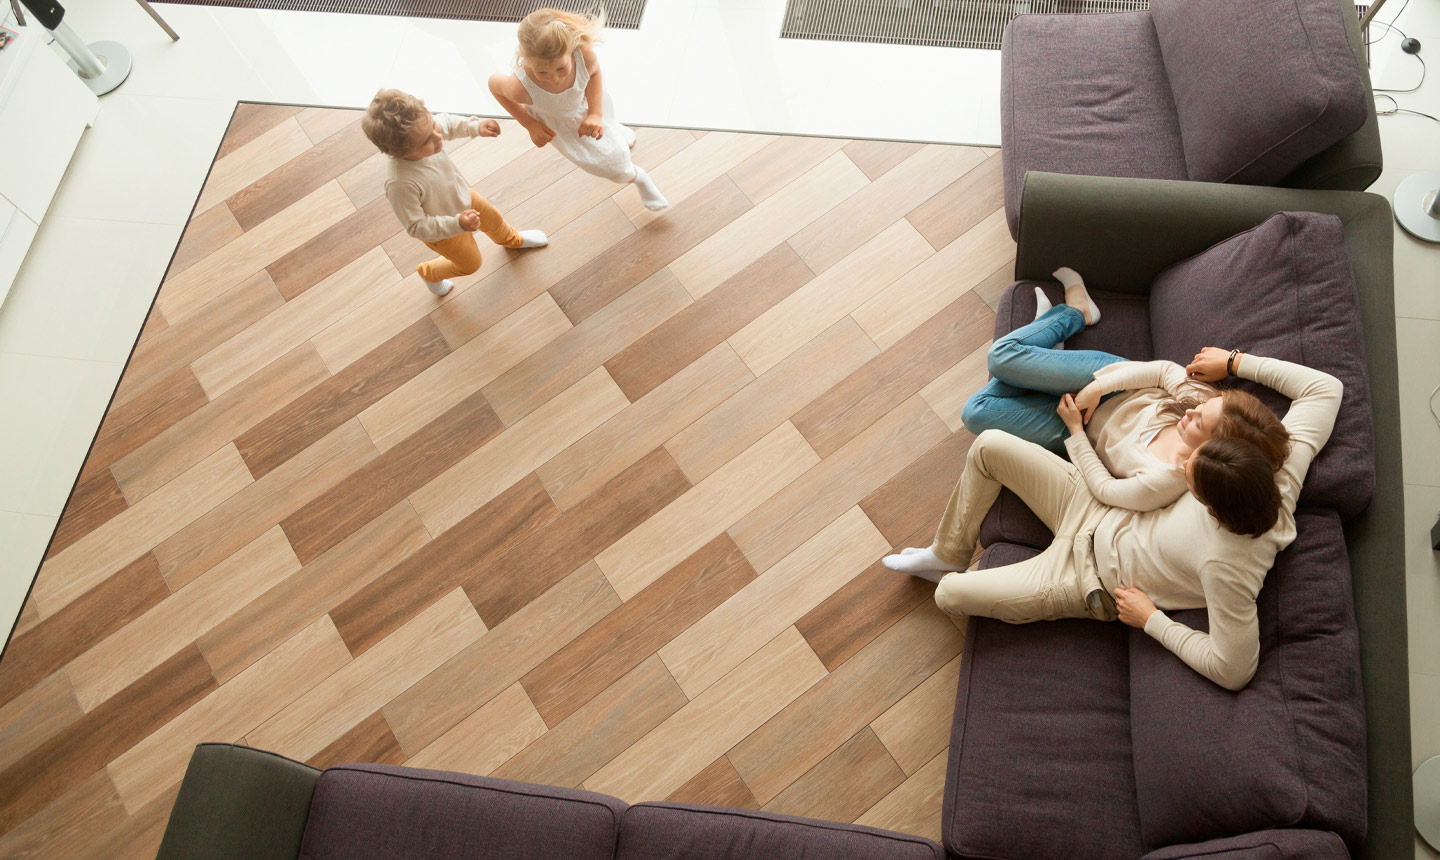 Discover ALEX waxes and give your parquet an impeccable touch!